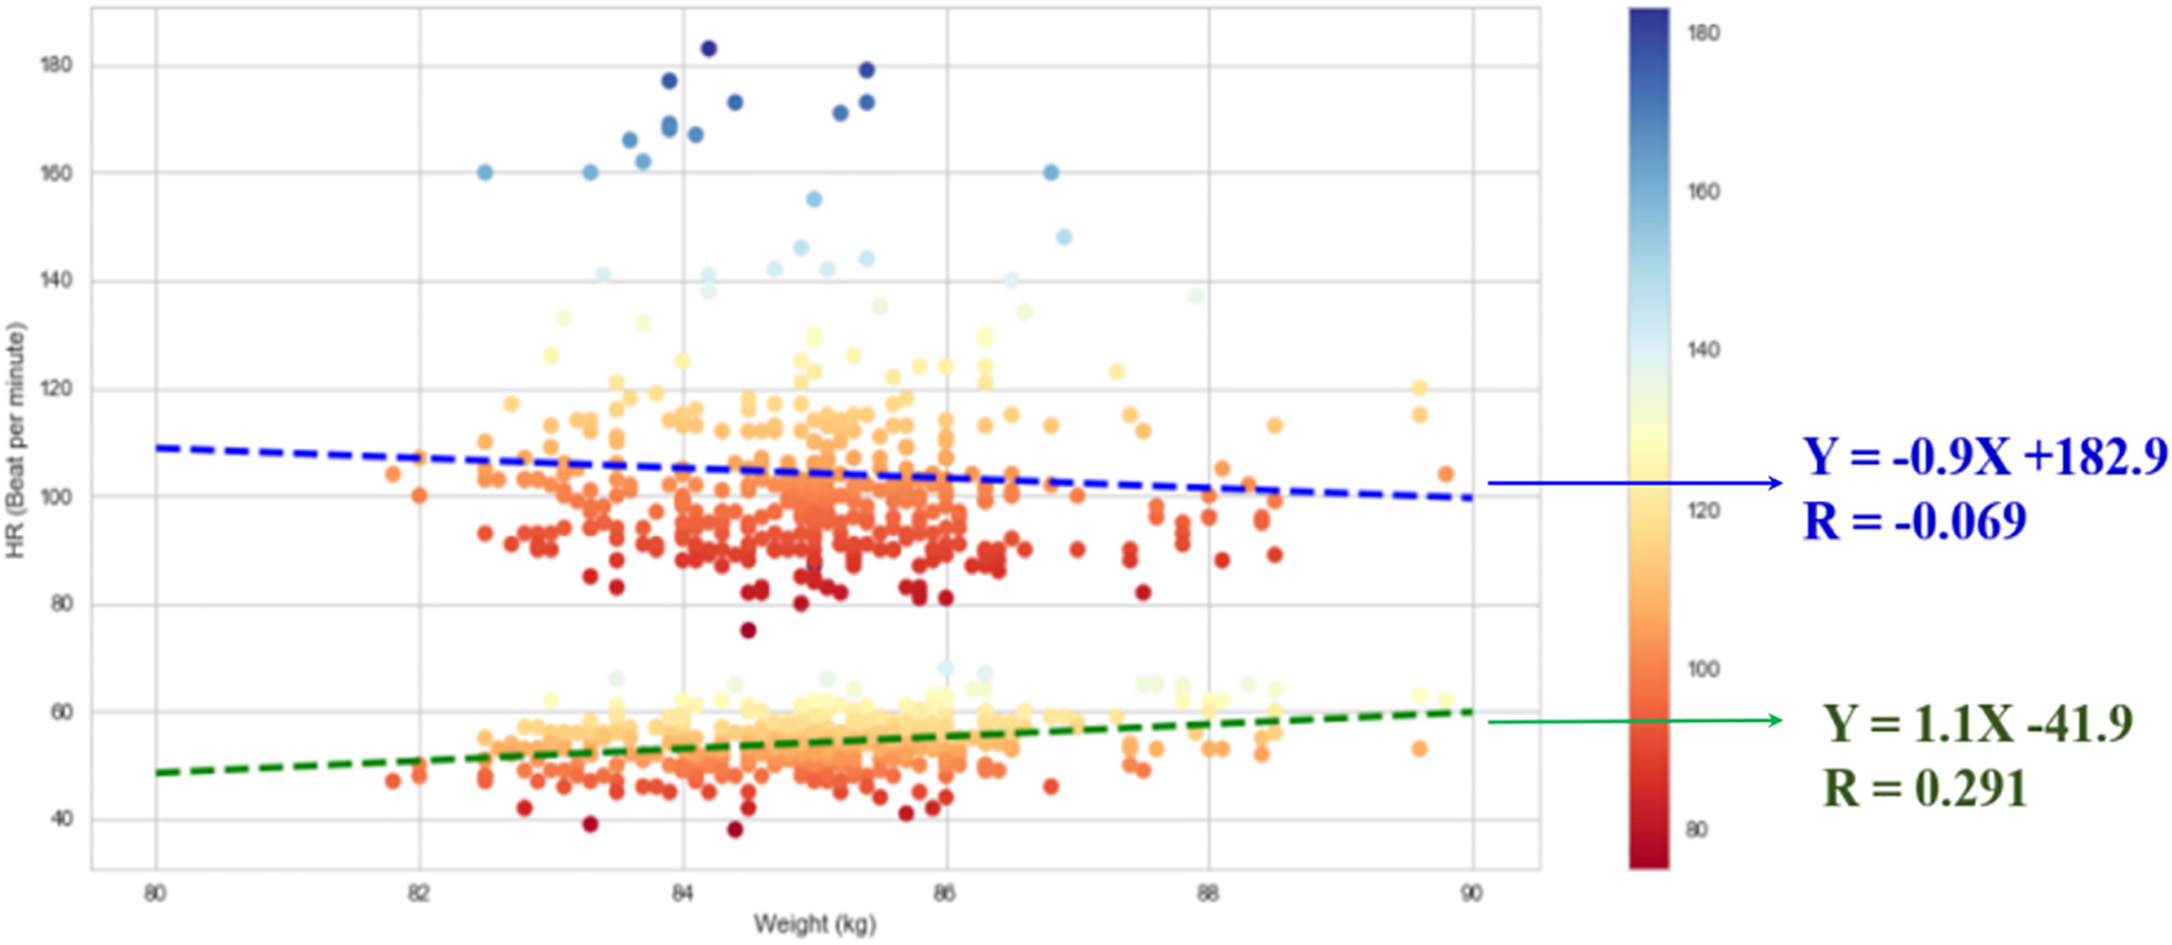 Analysis of the correlation between the heart rate and weight.